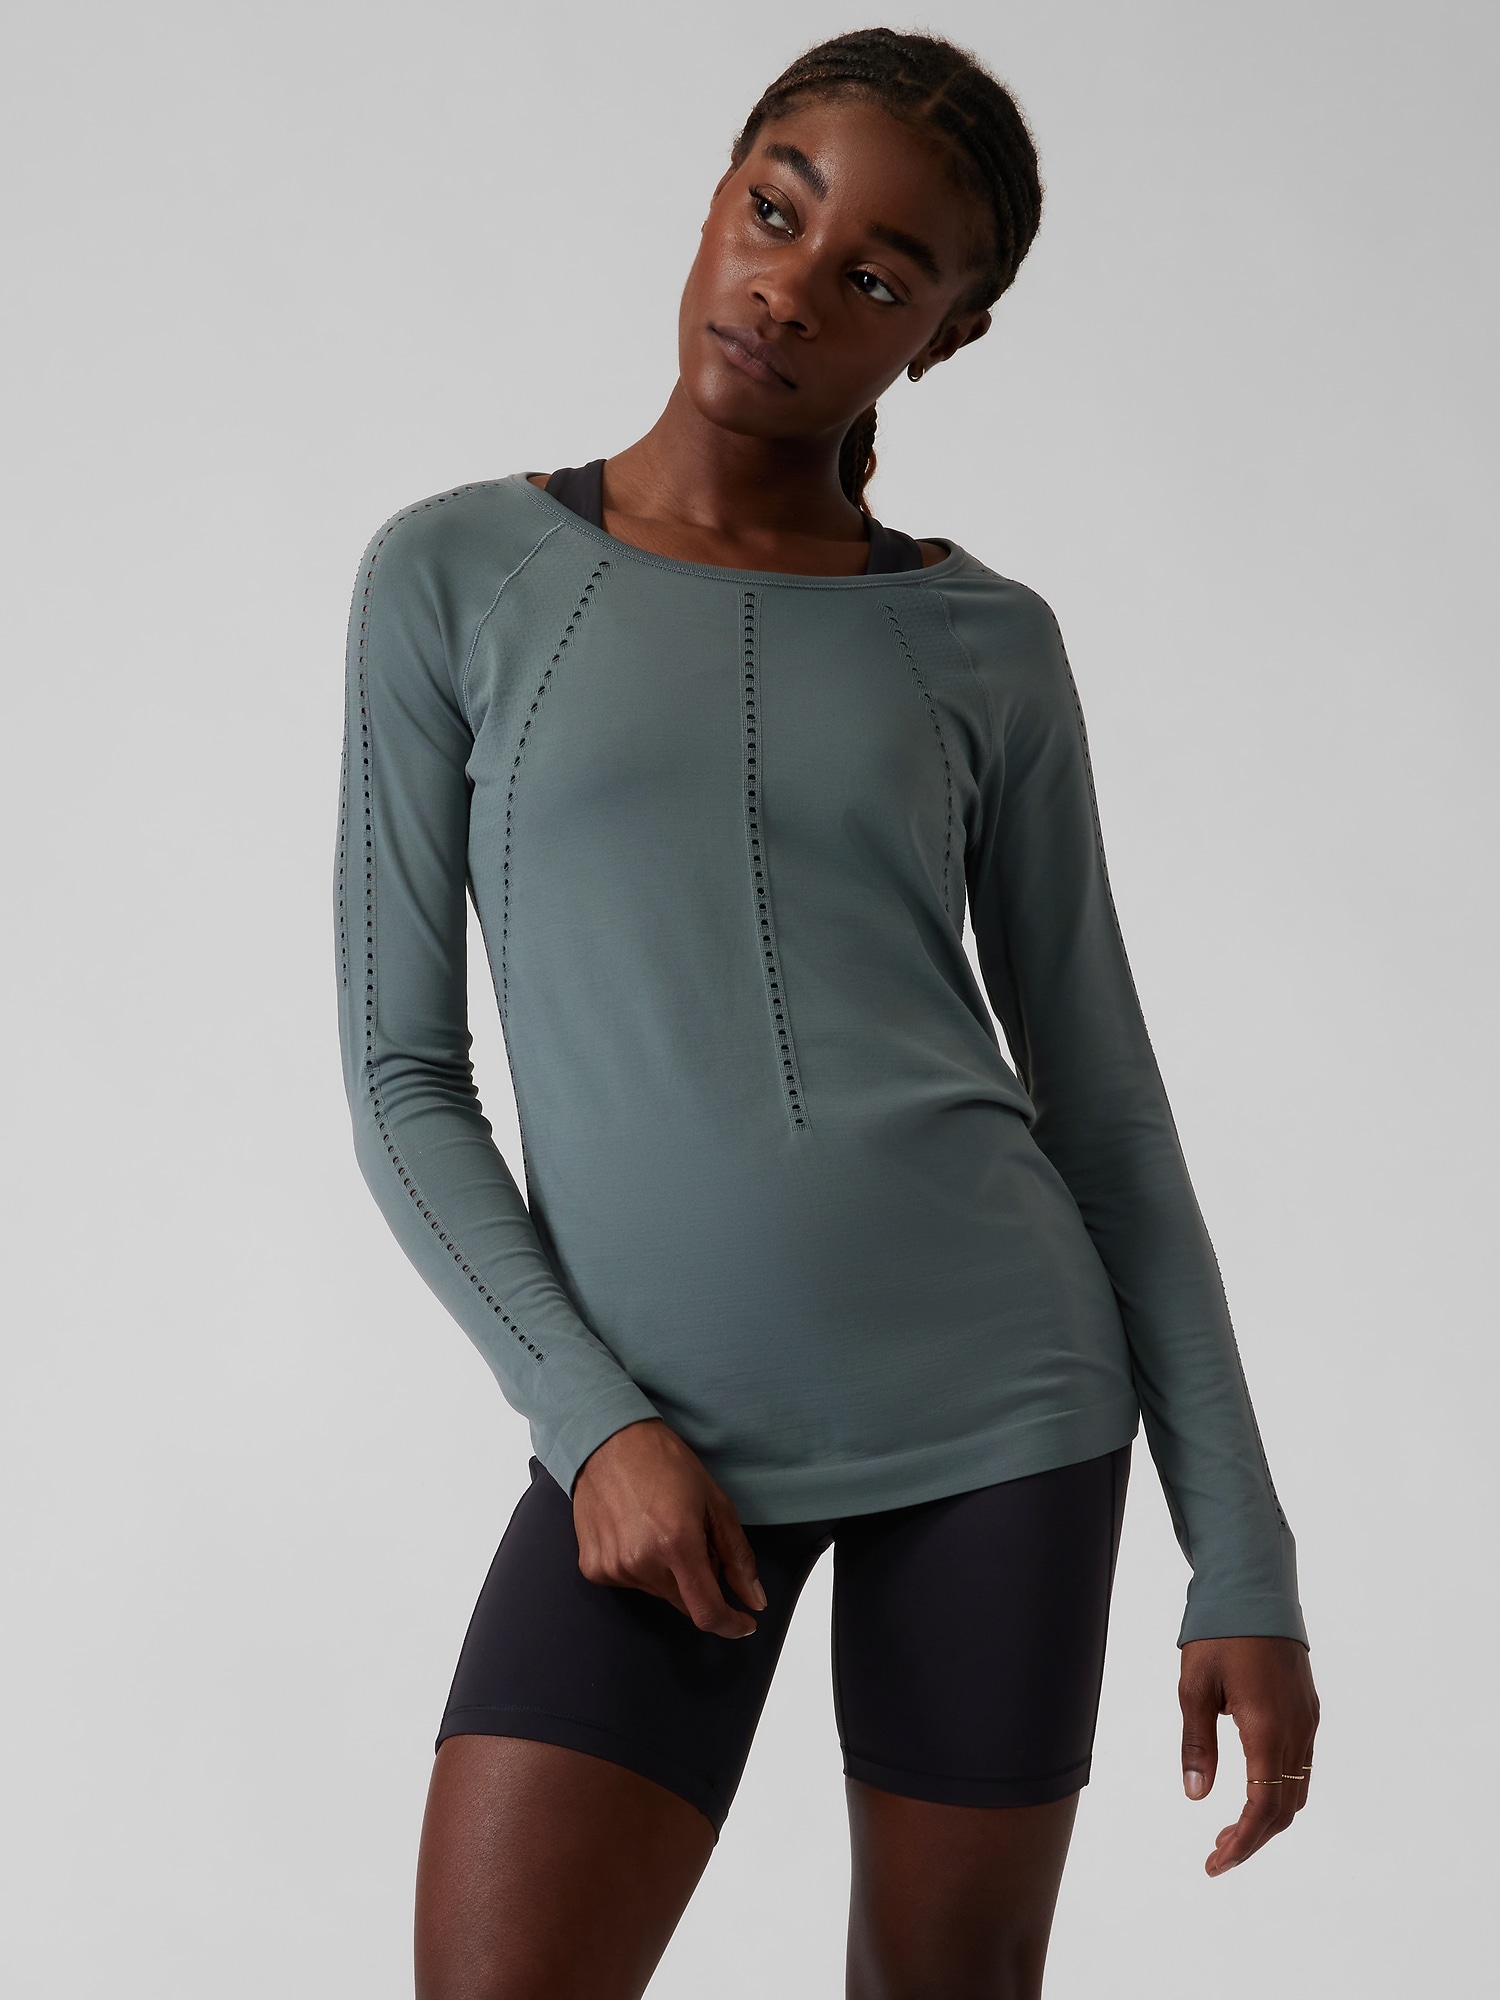 Foothill Seamless Long Sleeve